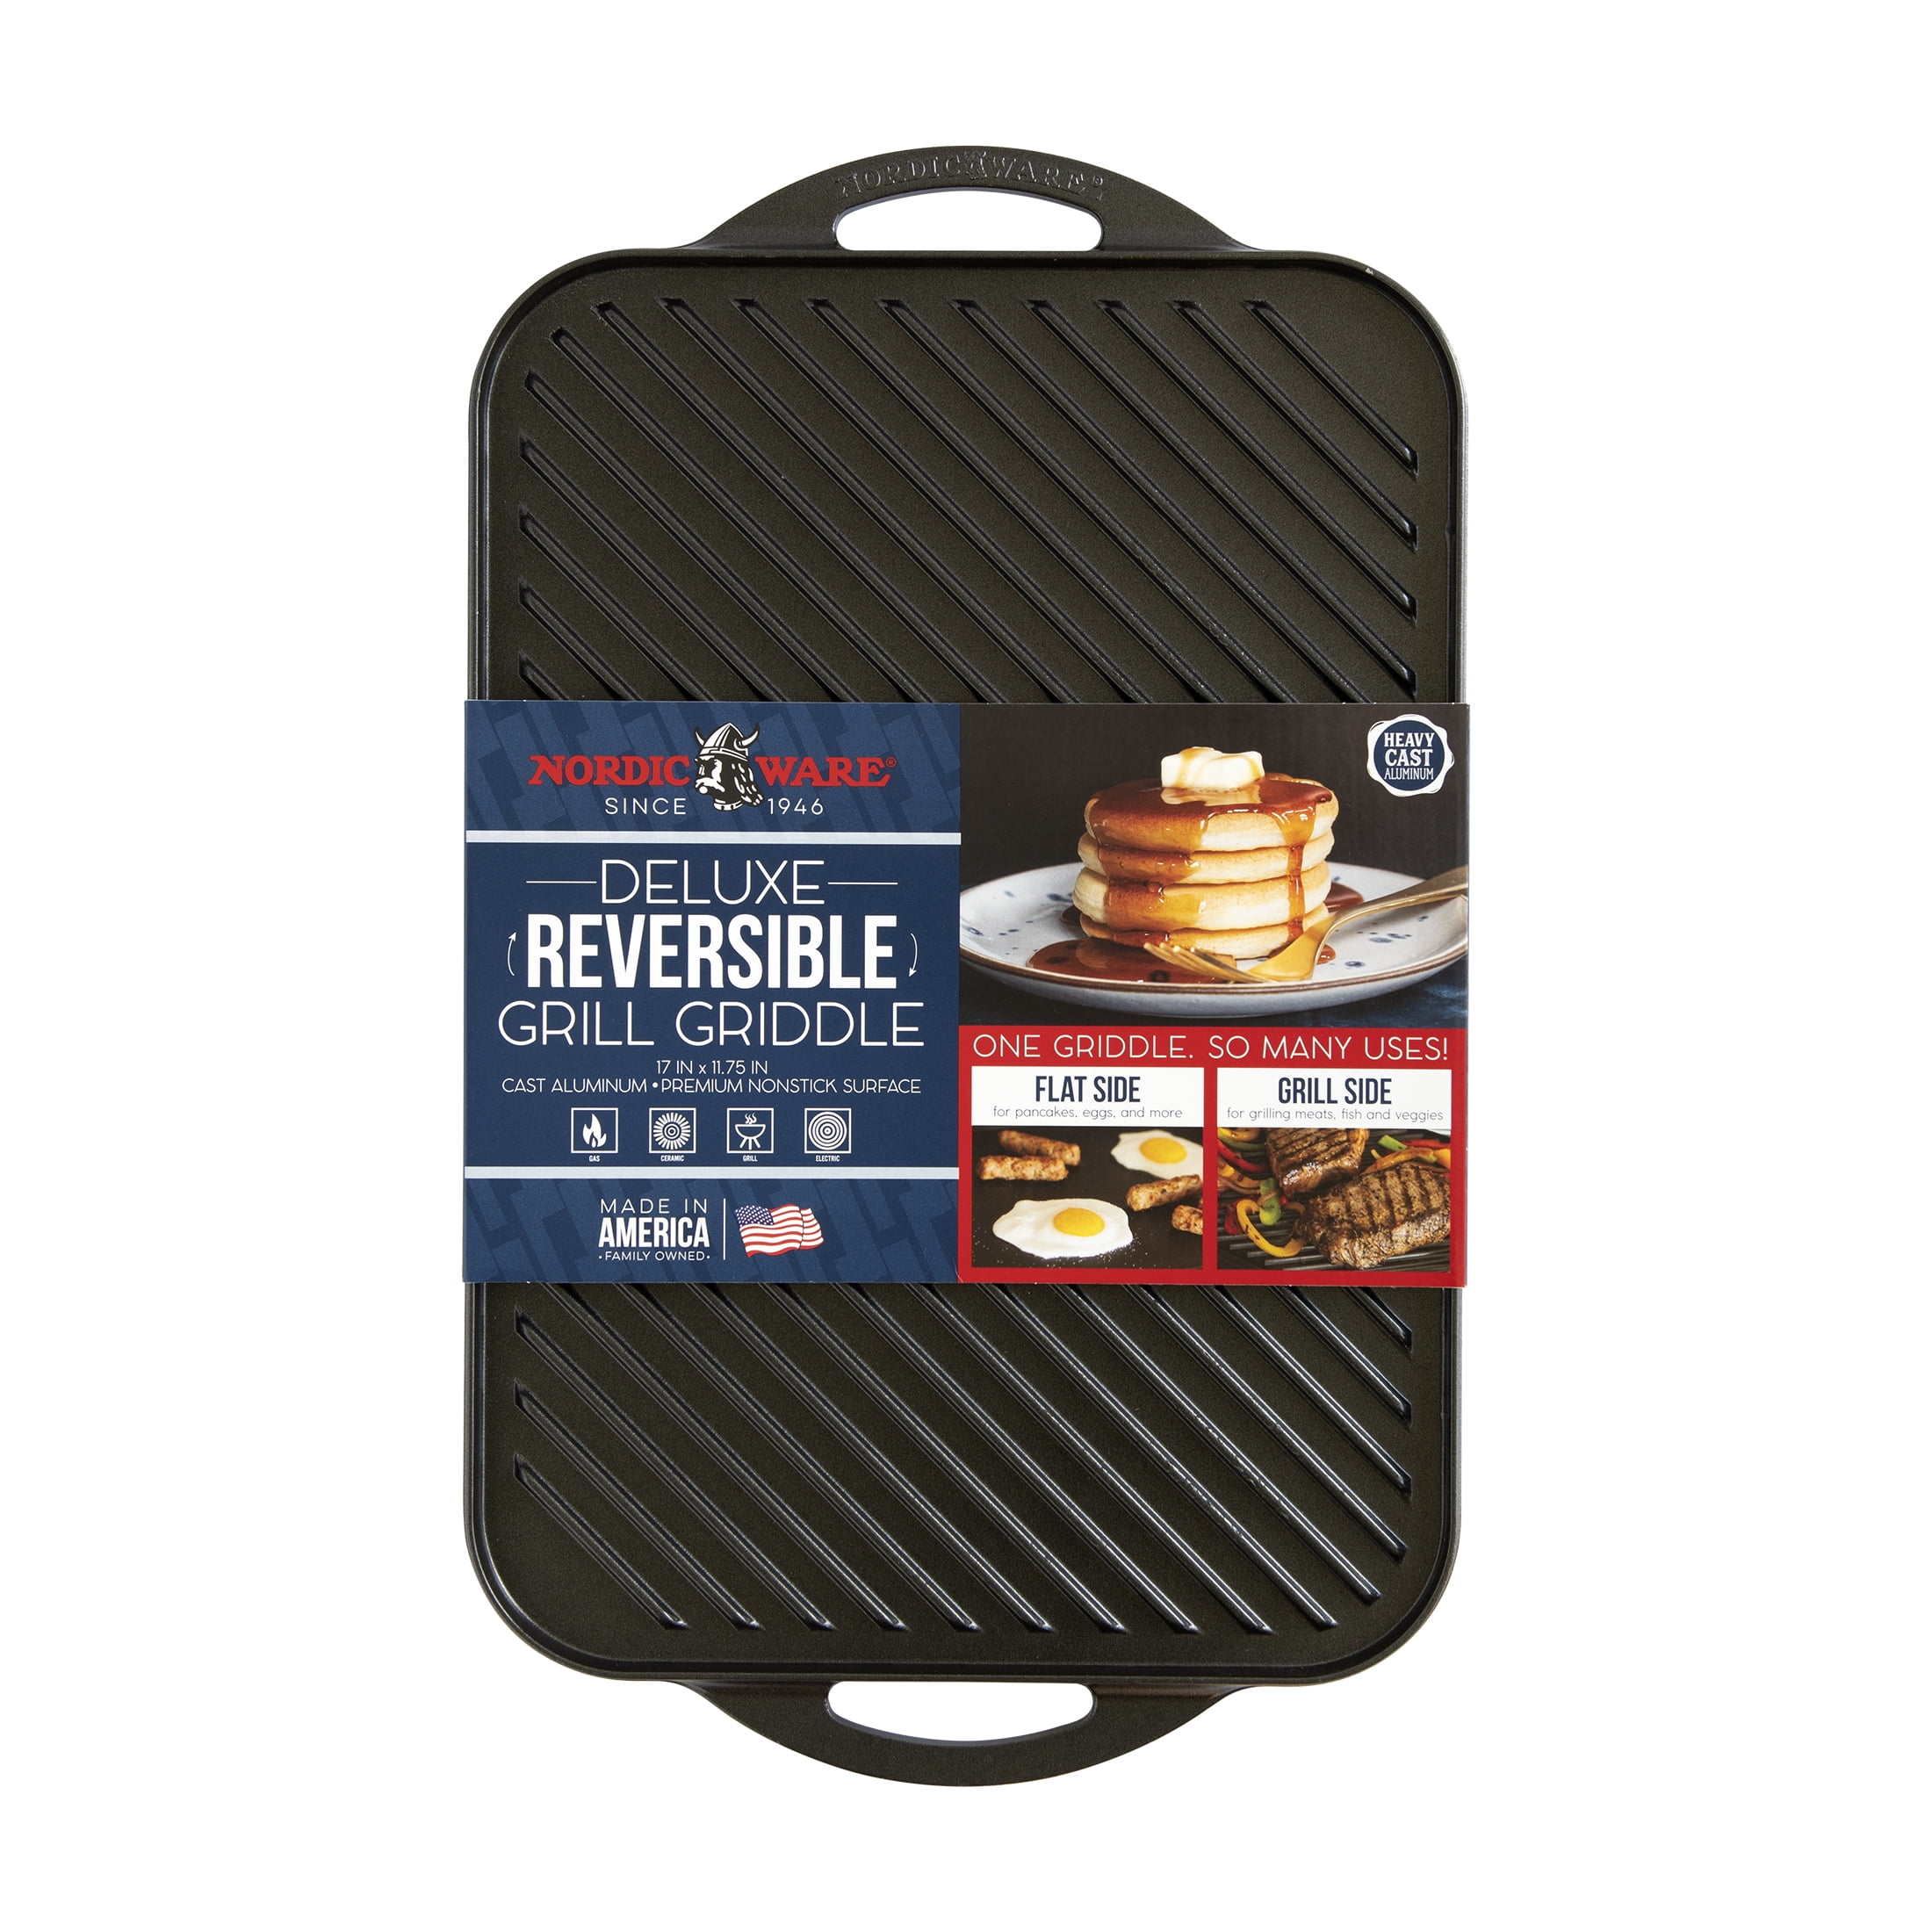 Nordic Ware Deluxe Reversible Grill Griddle